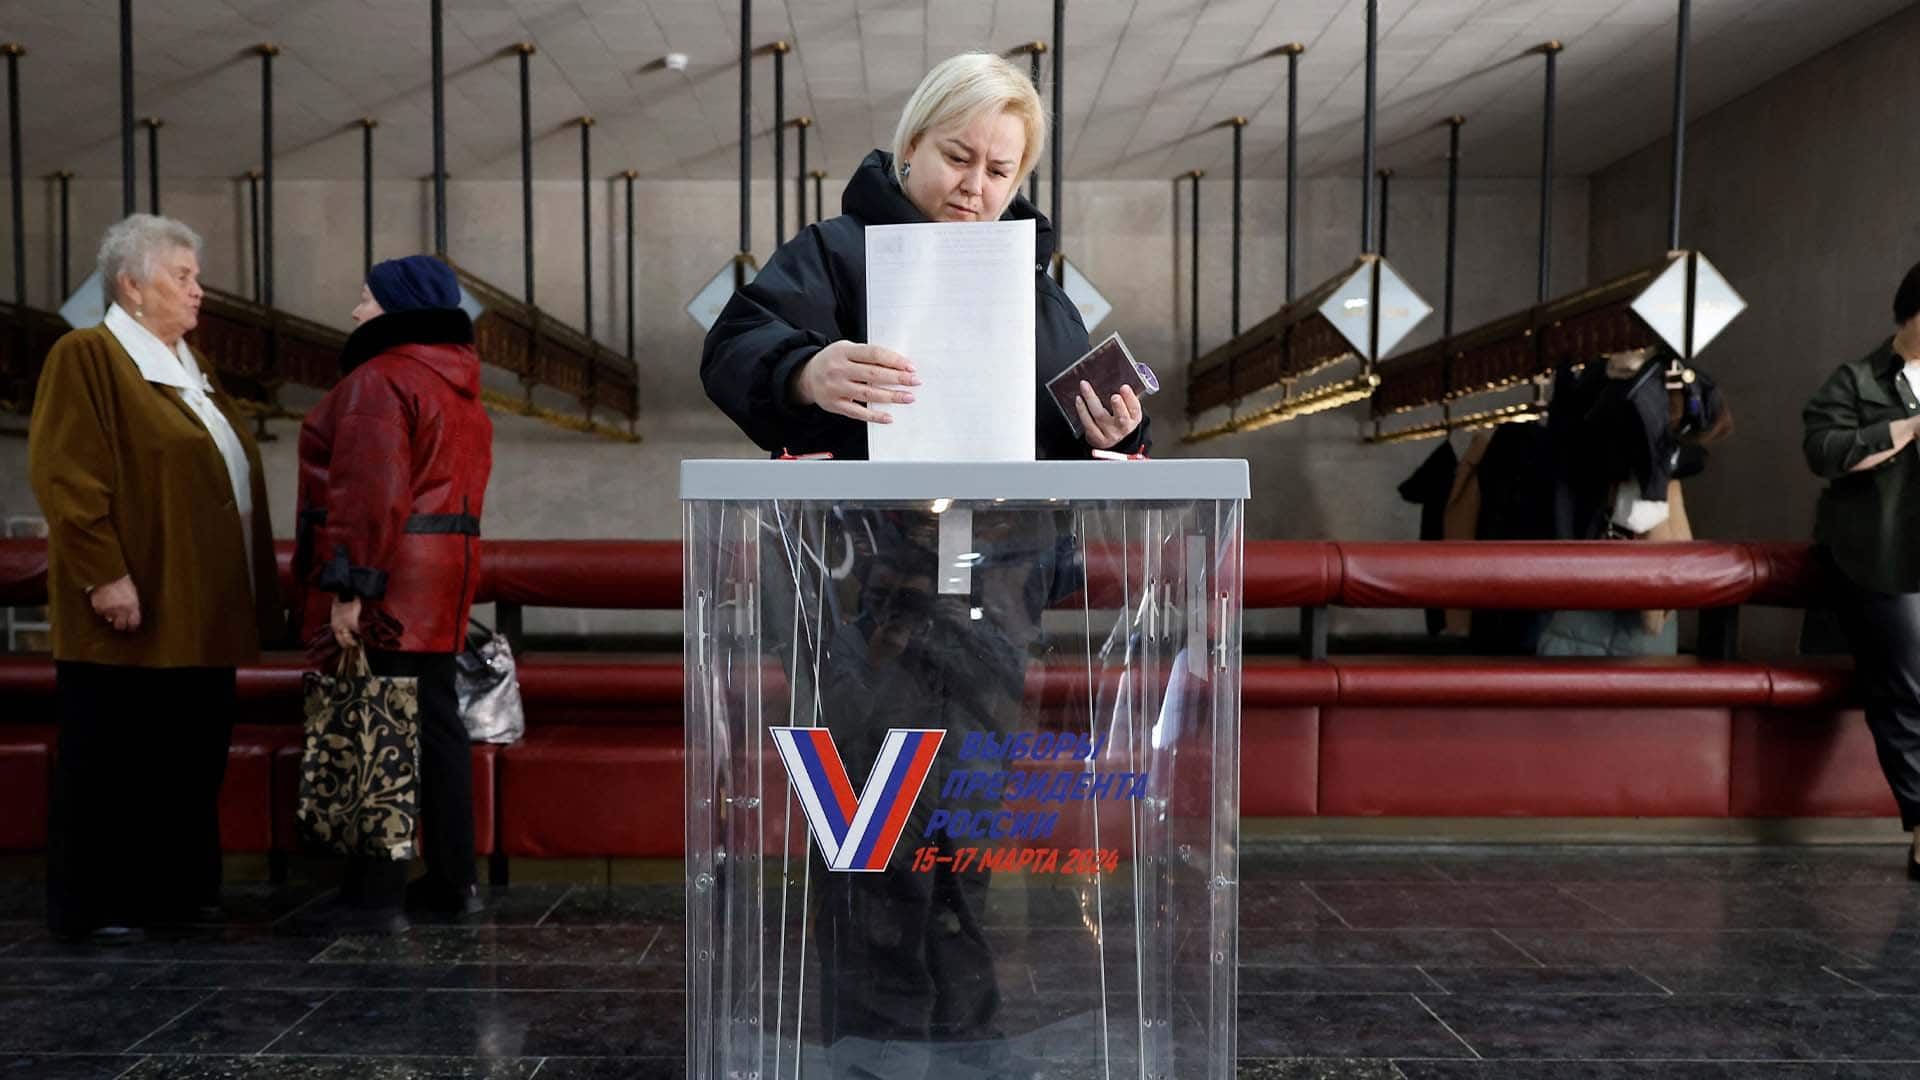 Russians vote in election without viable opposition candidates